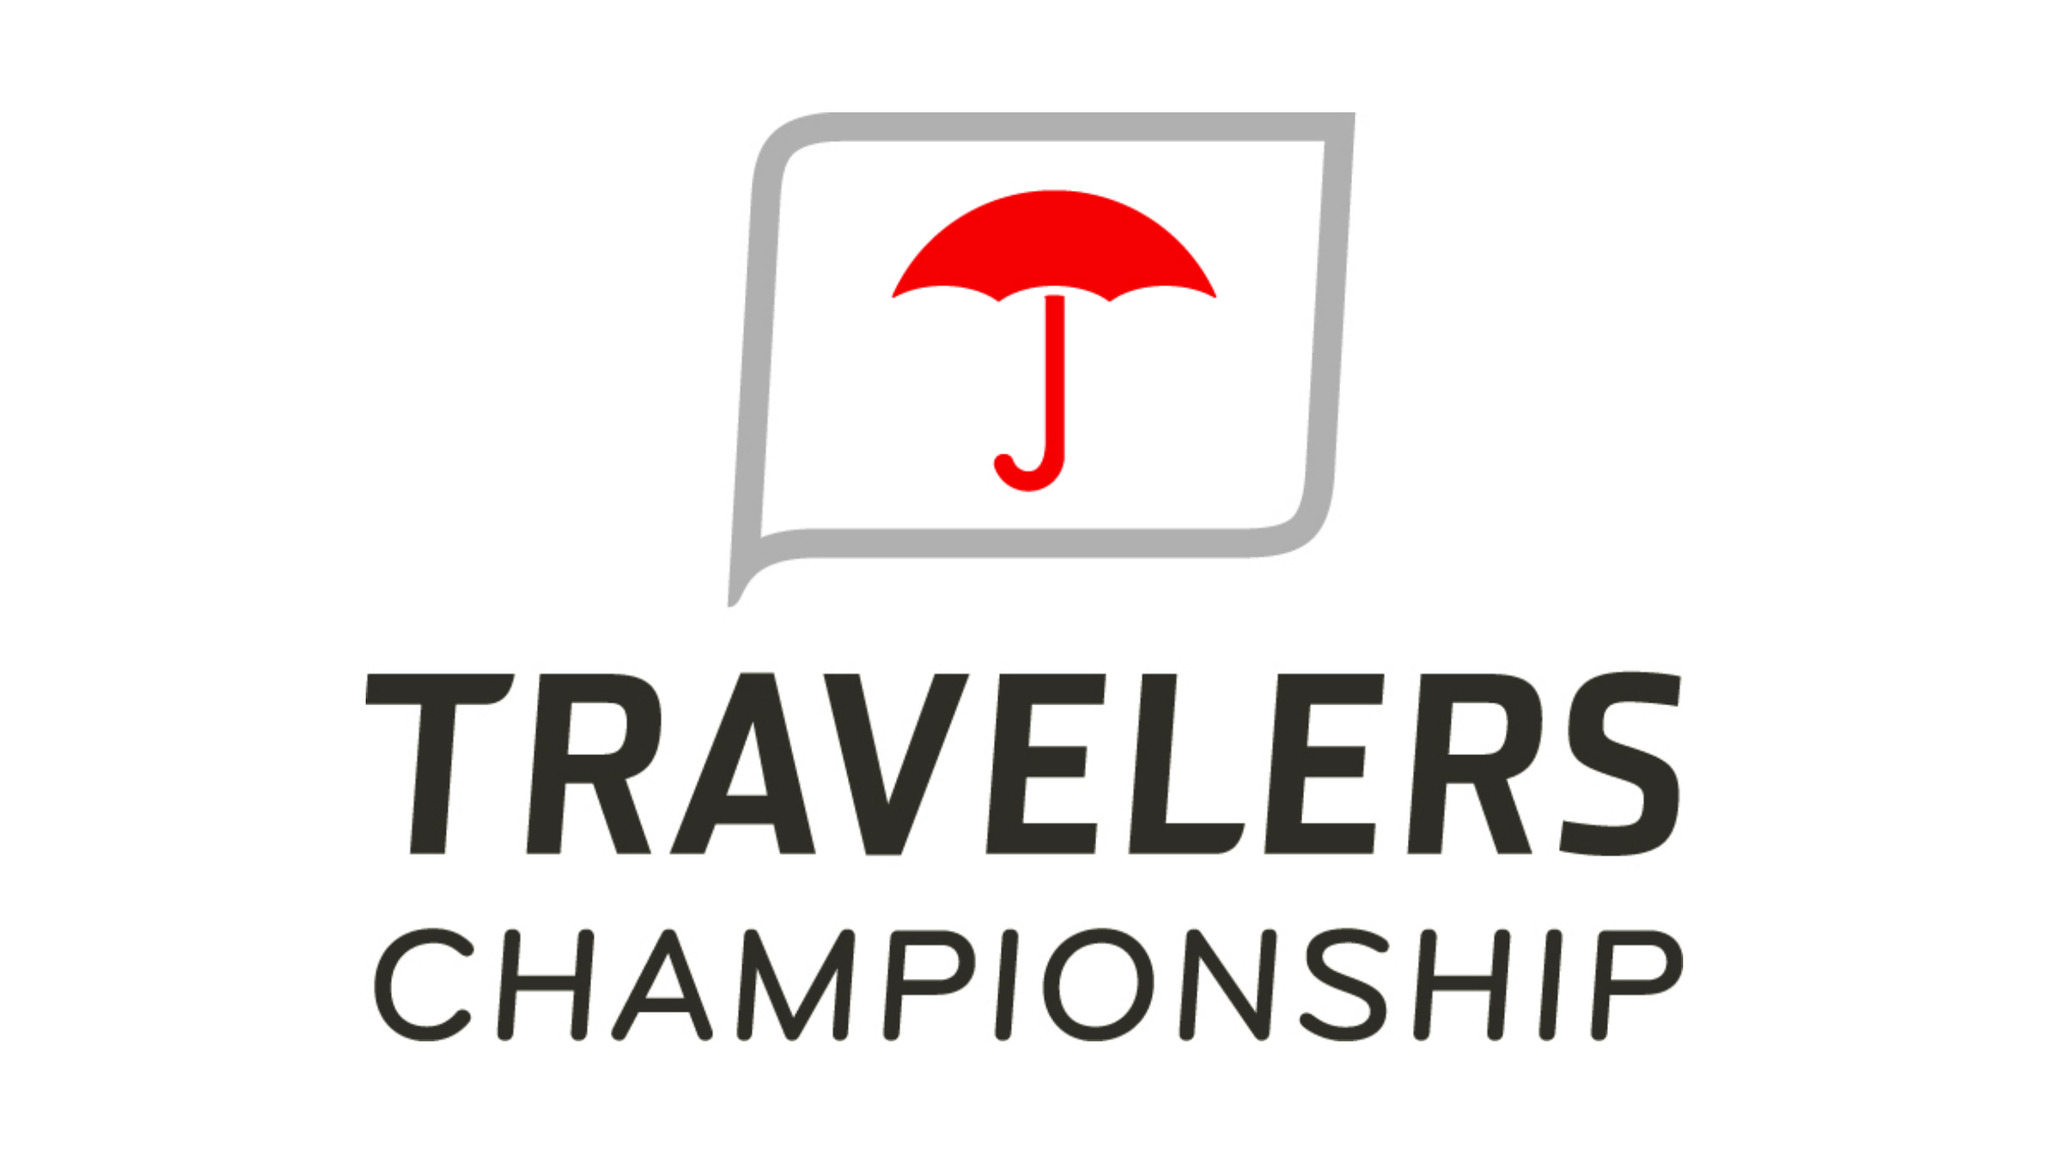 Travelers Championship Tickets Single Game Tickets & Schedule